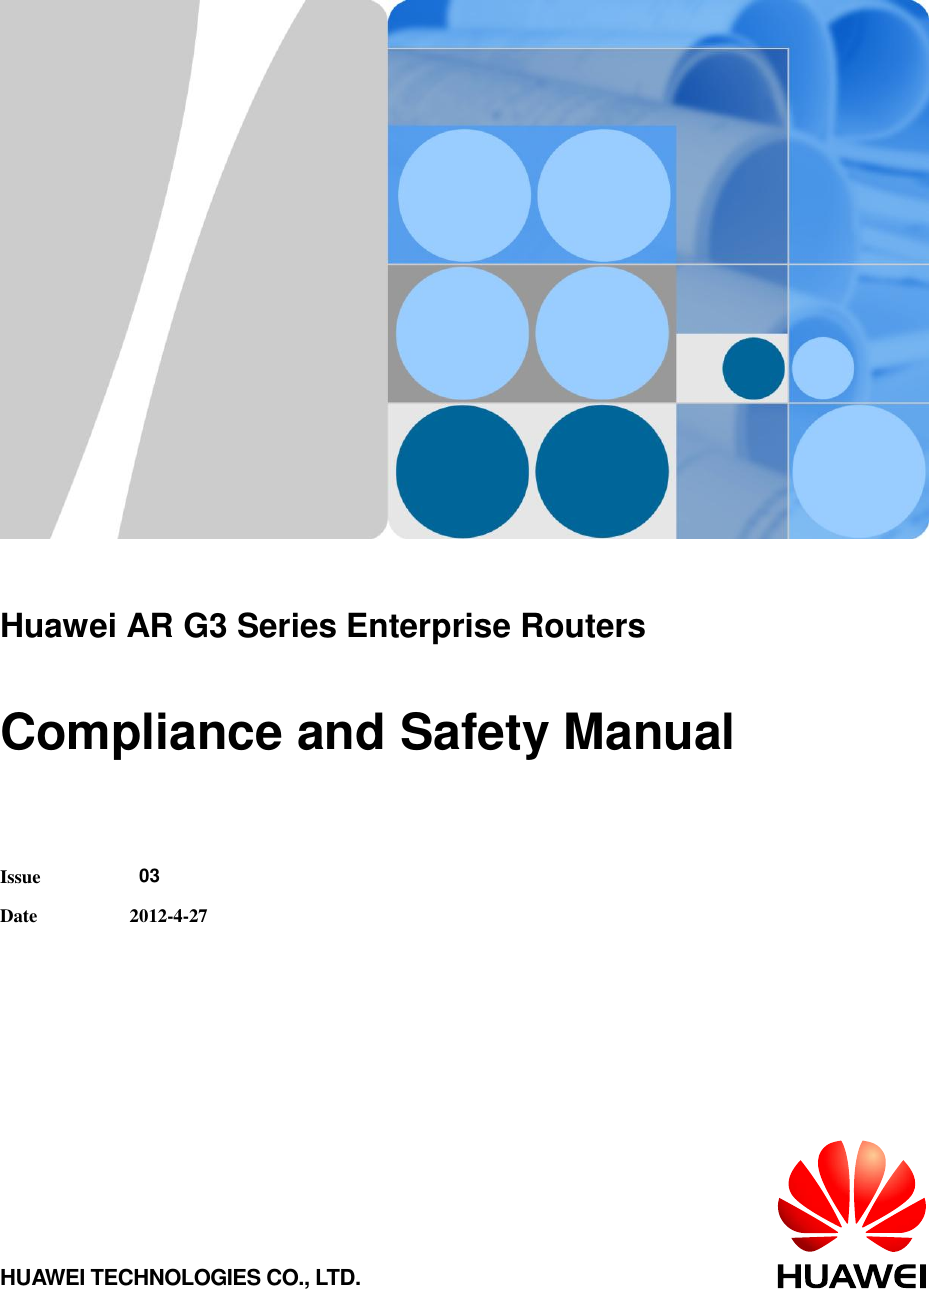           Huawei AR G3 Series Enterprise Routers  Compliance and Safety Manual   Issue  03 Date 2012-4-27 HUAWEI TECHNOLOGIES CO., LTD. 